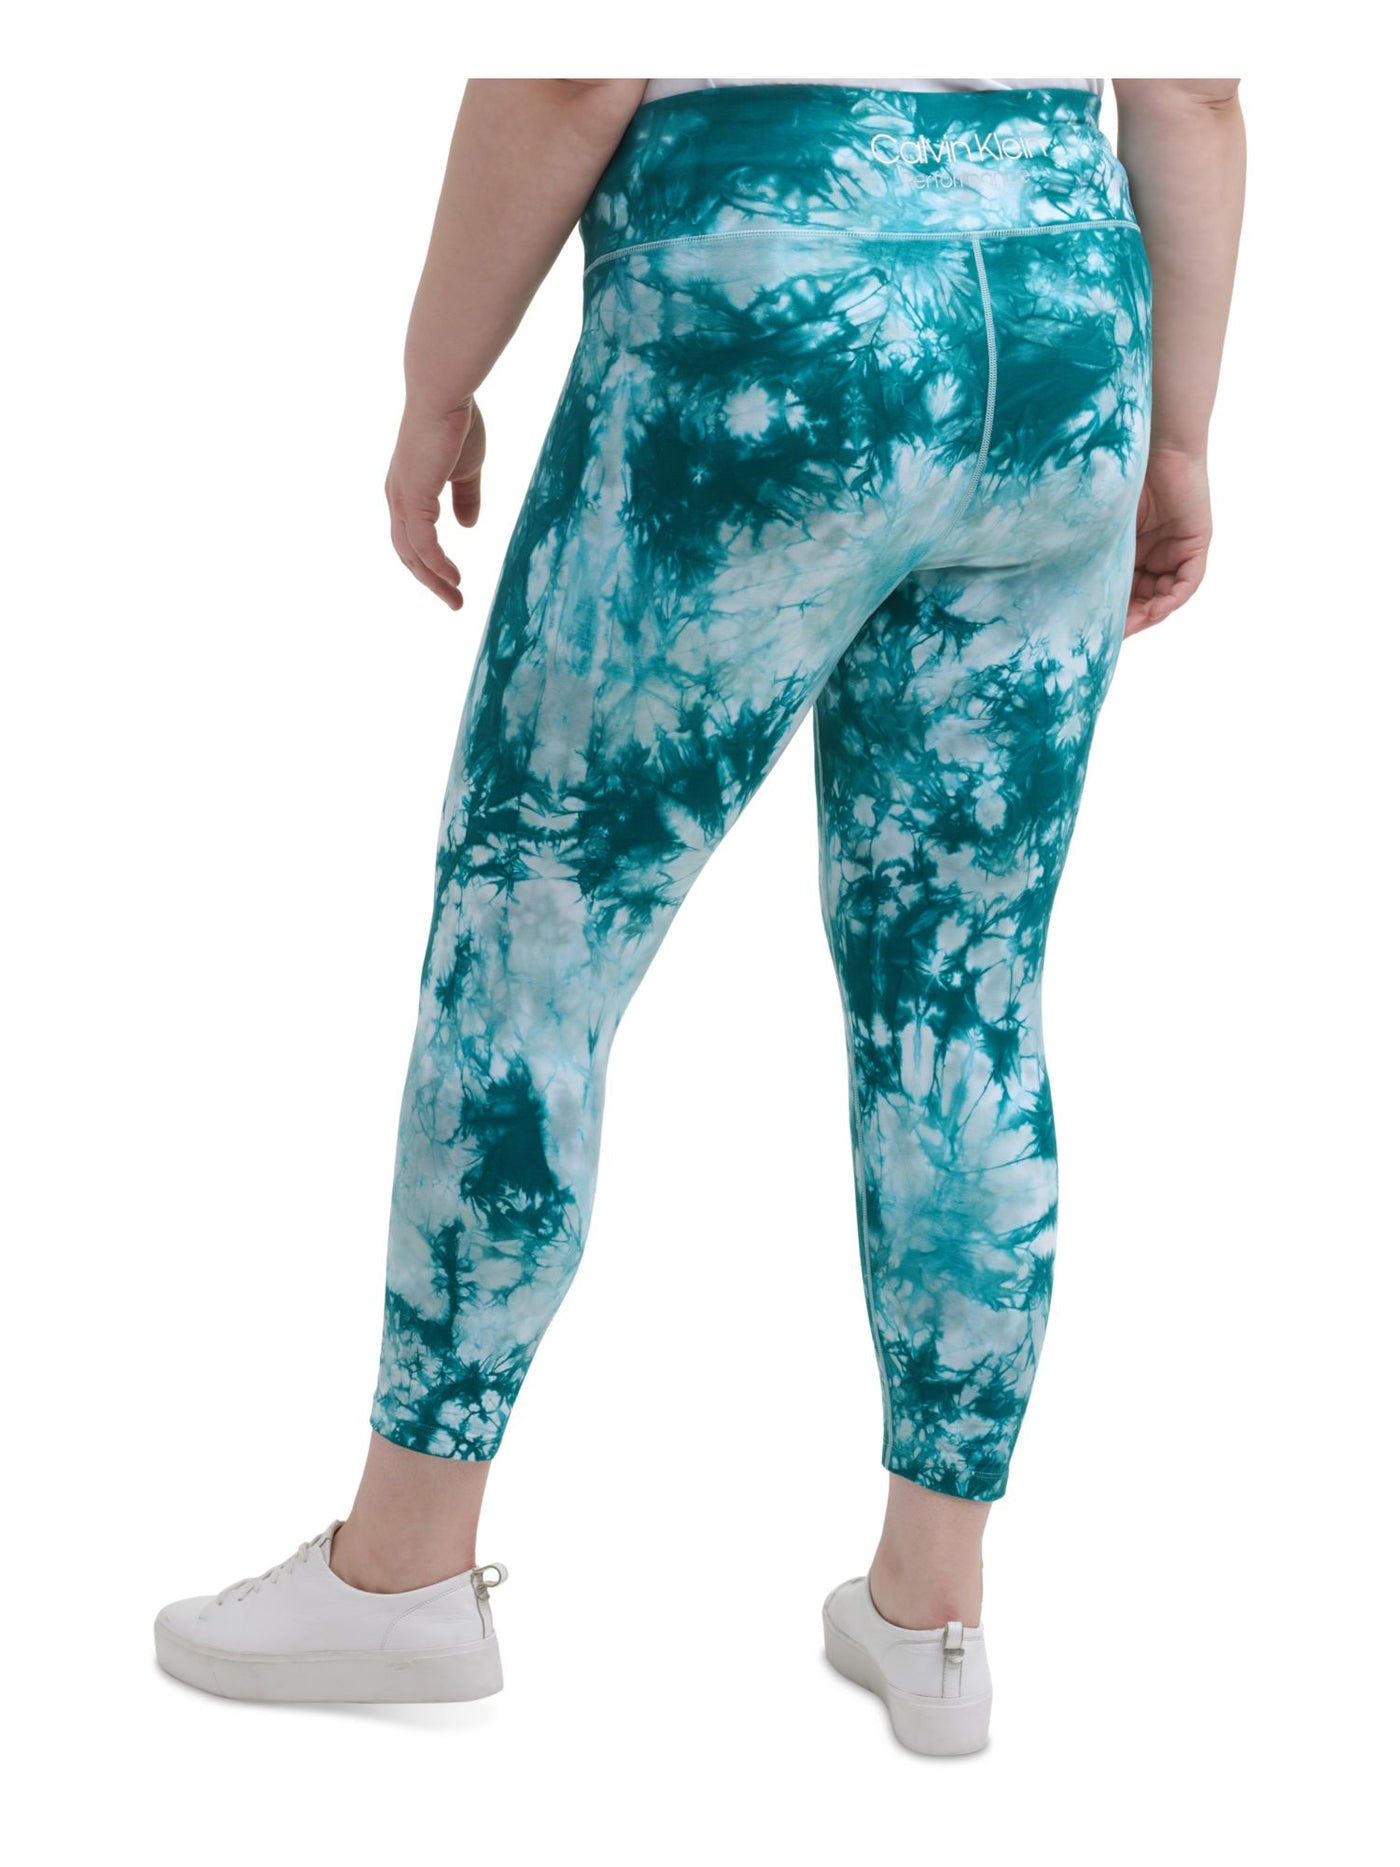 CALVIN KLEIN PERFORMANCE Womens Turquoise Stretch Pocketed Pull-on Style Tie Dye Active Wear Skinny Leggings Plus 1X